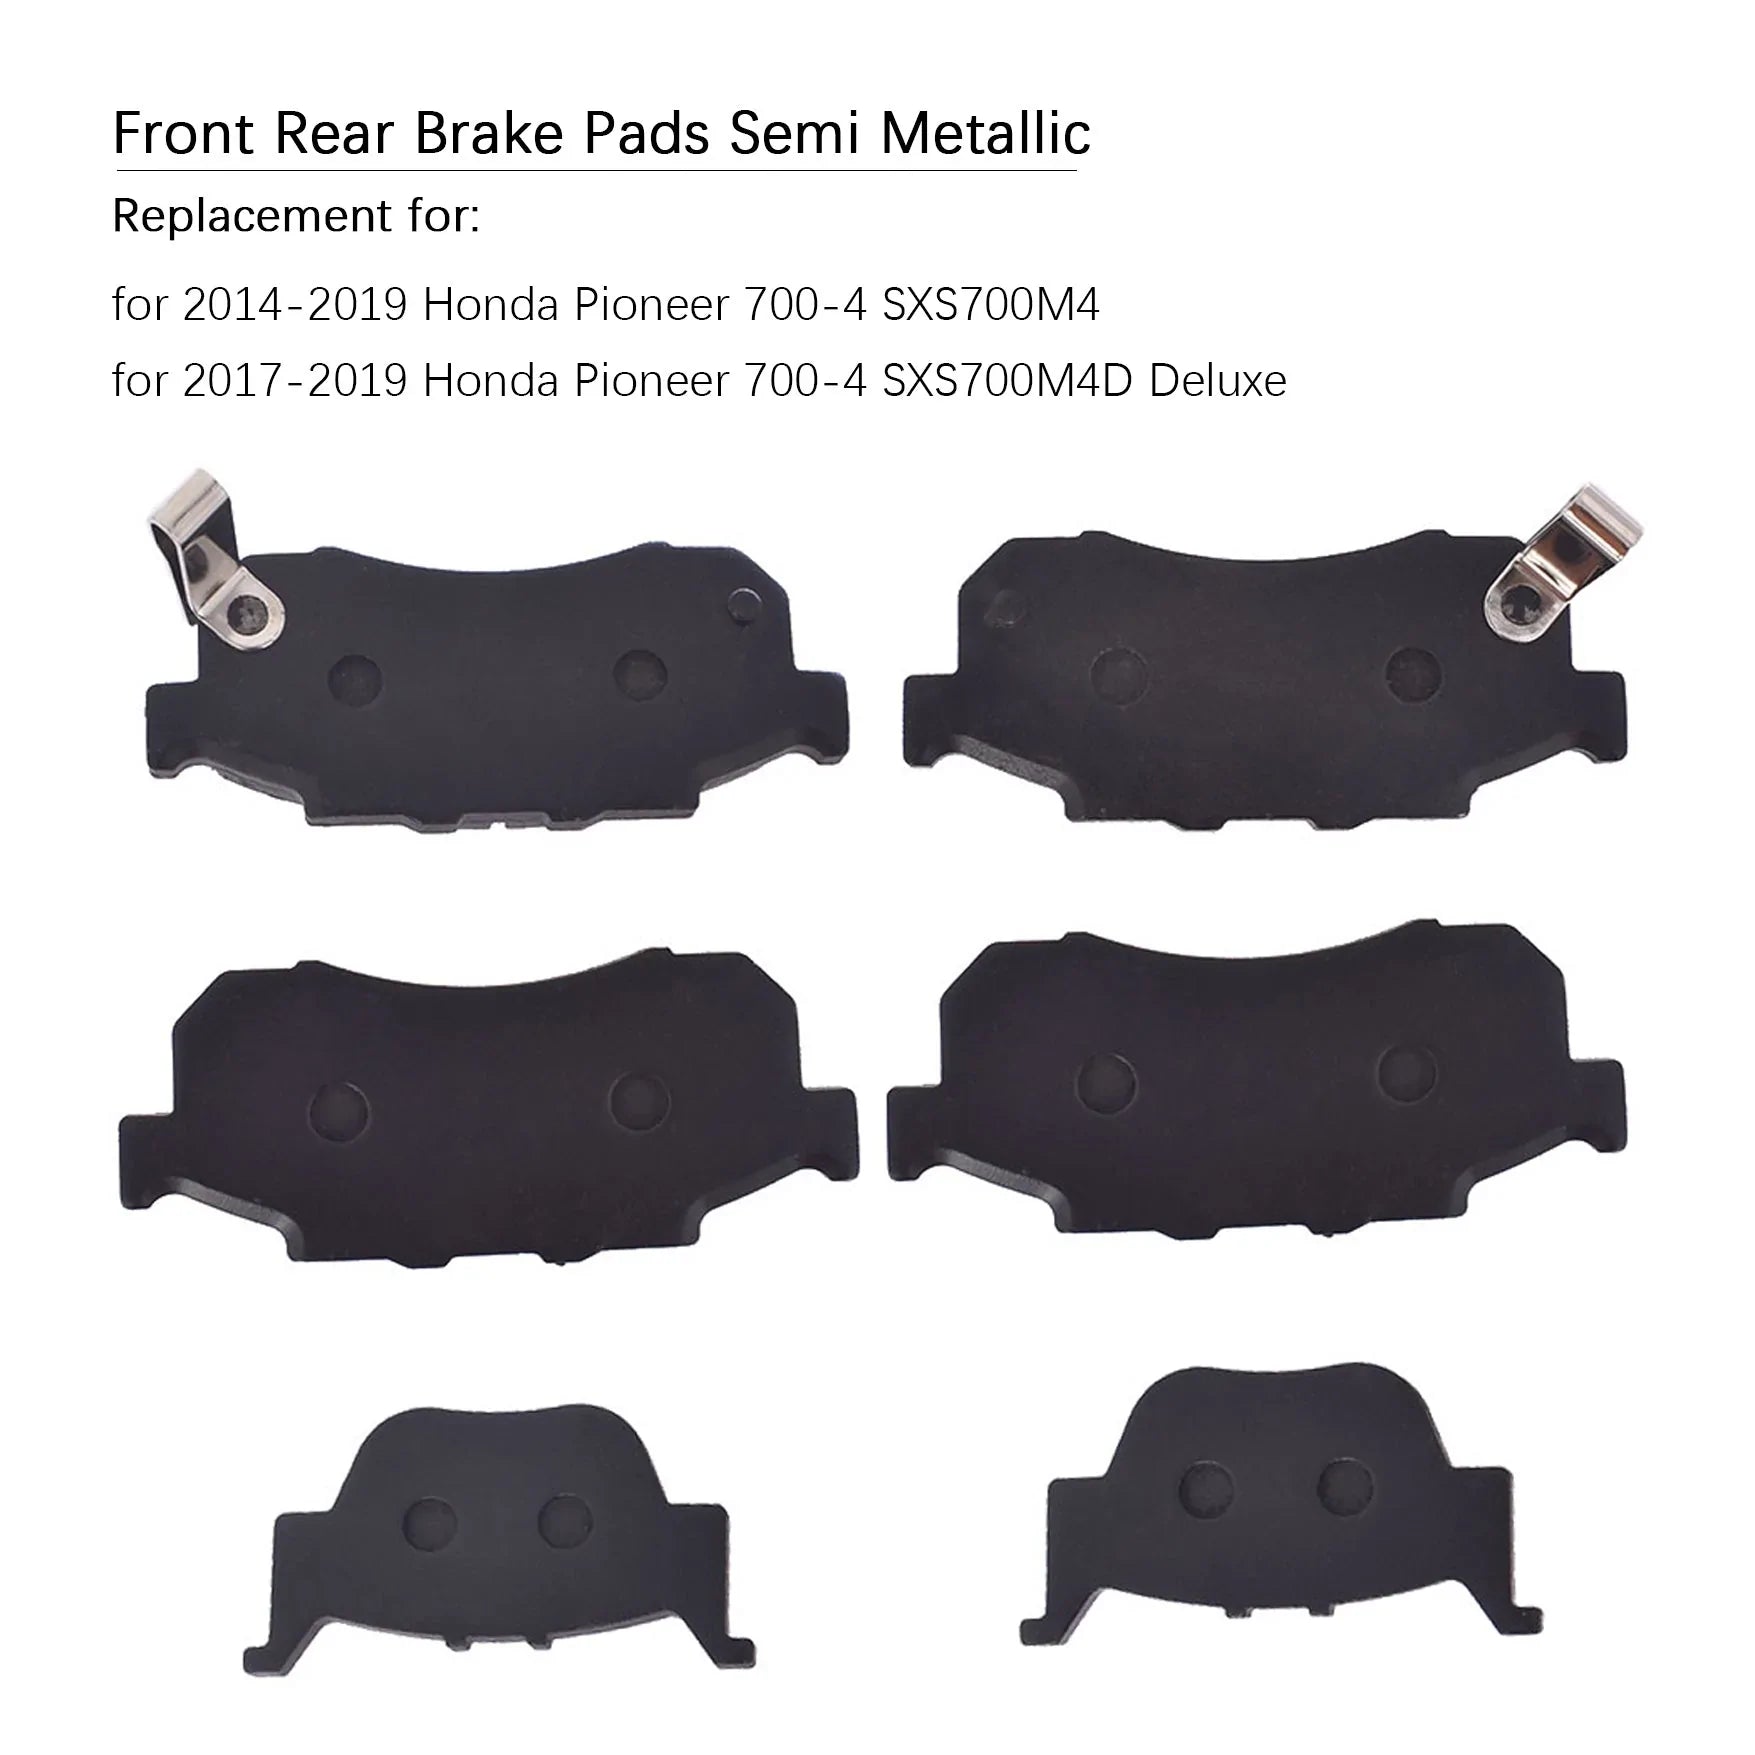 labwork A Group of Front & Rear Semi-Metallic Brake Pads Replacement for 2014-2019 Honda Pioneer 700-4 SXS700 Deluxe M4 M4D 06435-HN8-01 LAB WORK MOTO